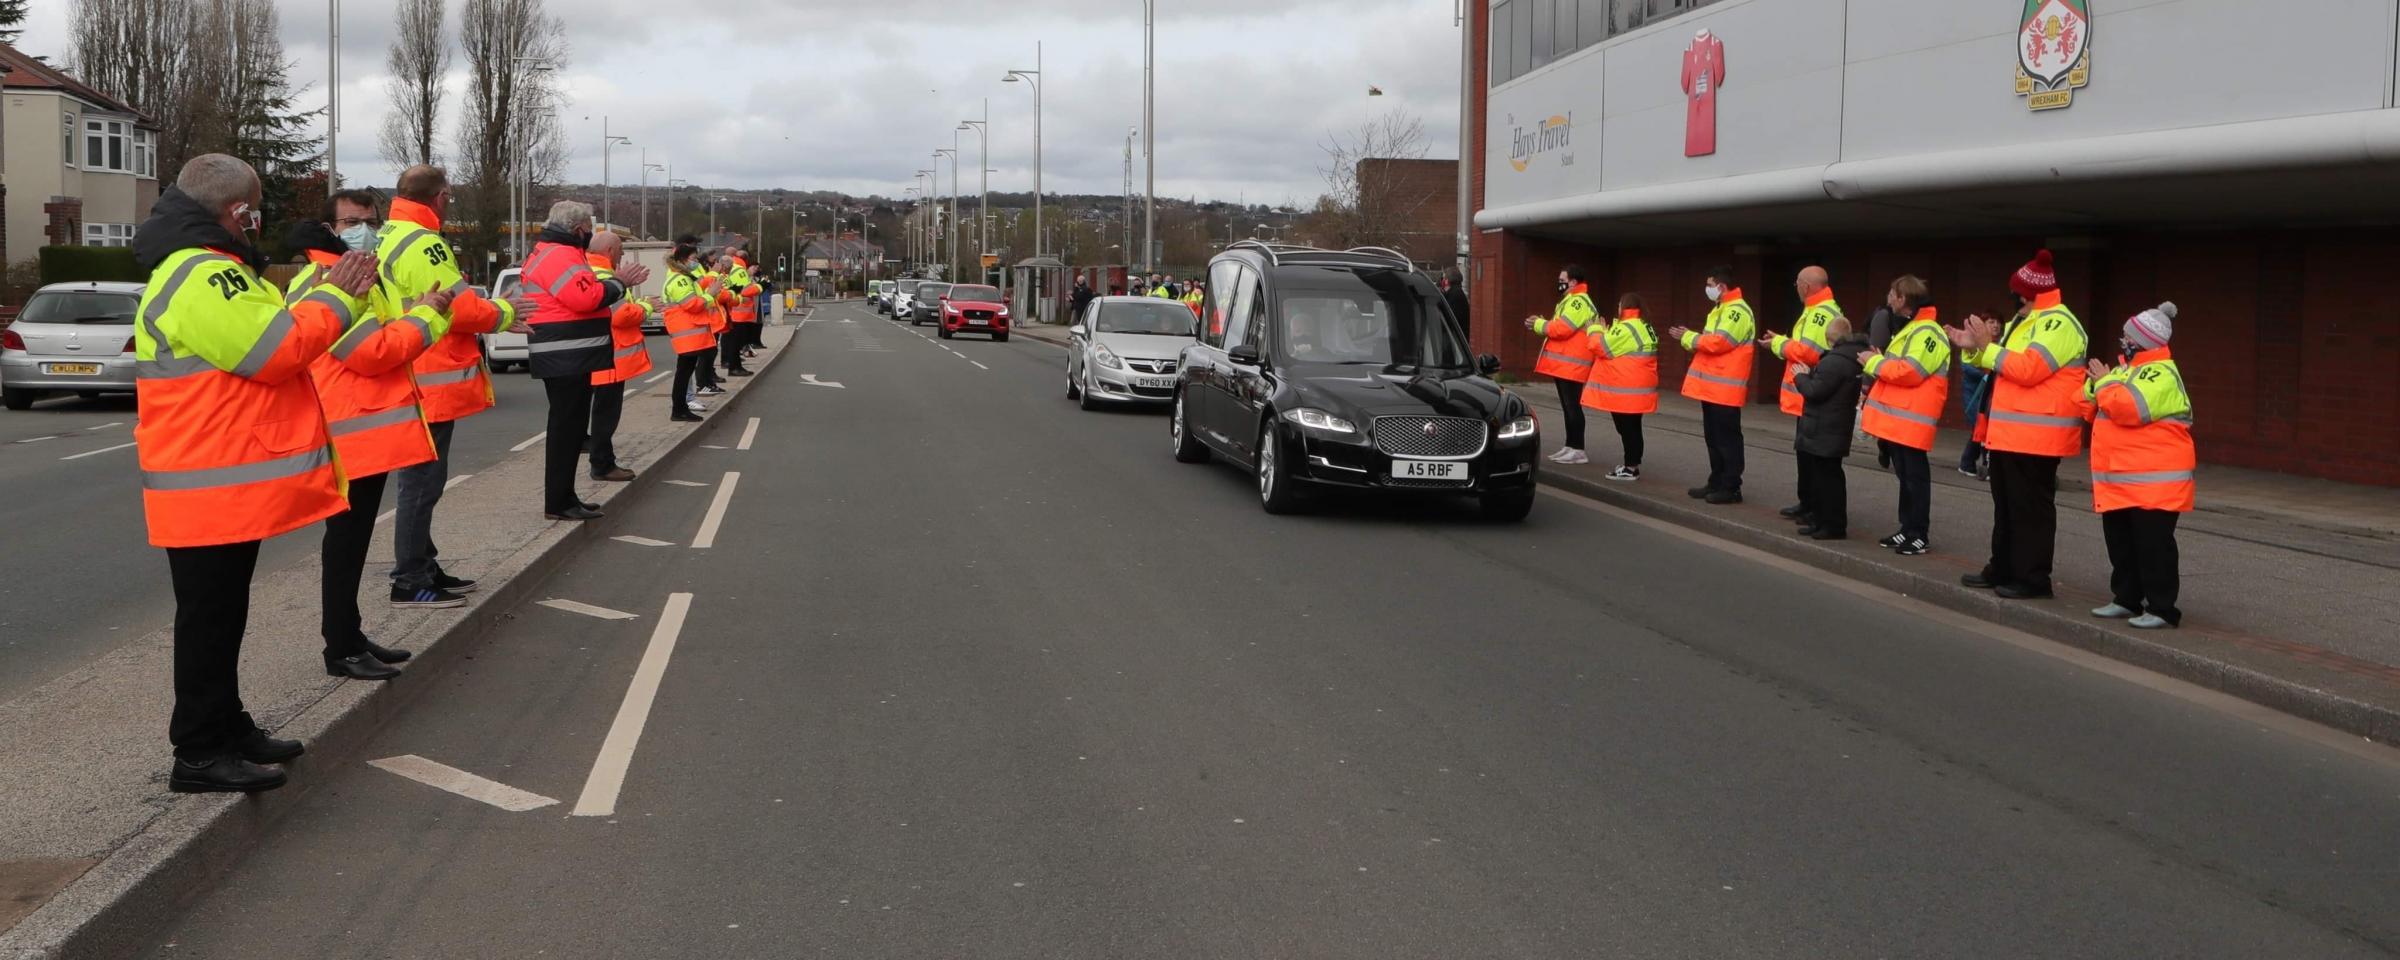 Staff at Wrexham AFC and members of the public turn out to pay respects to Alun Salisbury on the day of his funeral, Thursday (April 8). Images: Alun Roberts